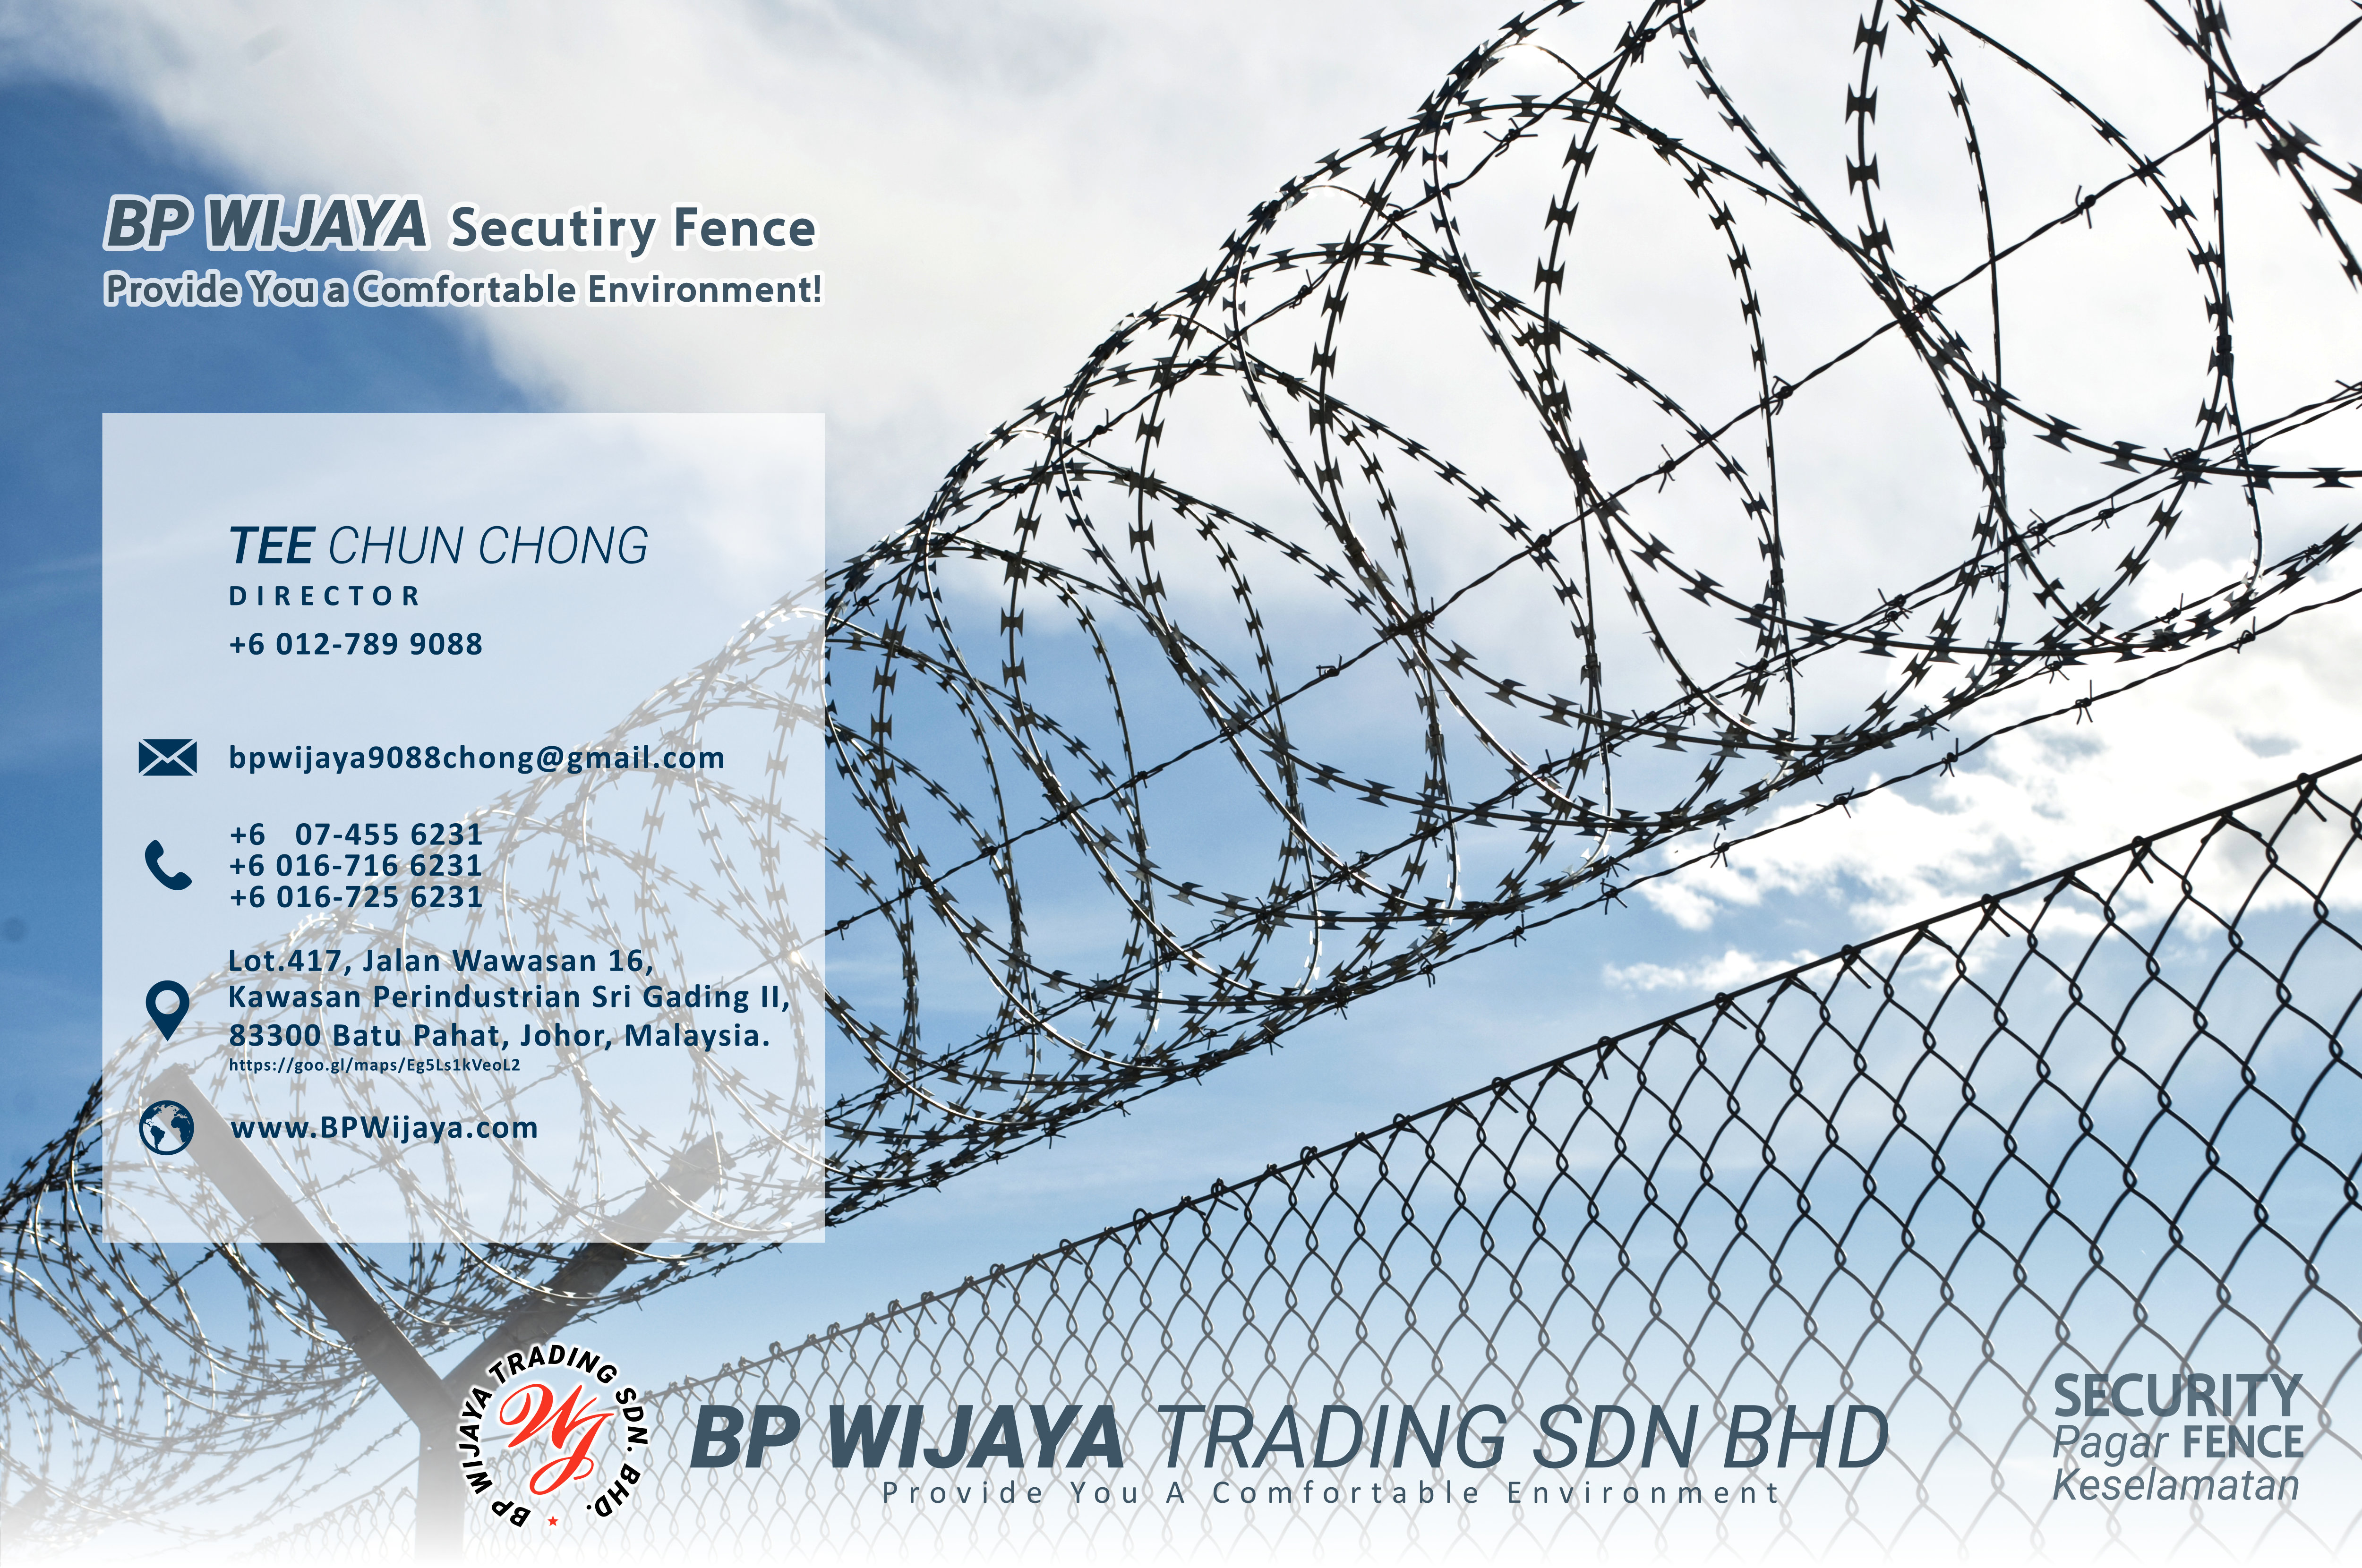 BP Wijaya Trading Sdn Bhd Fence Malaysia Selangor Kuala Lumpur manufacturer of safety fences building materials for housing construction site Security fencing factory fence house fence A01-013